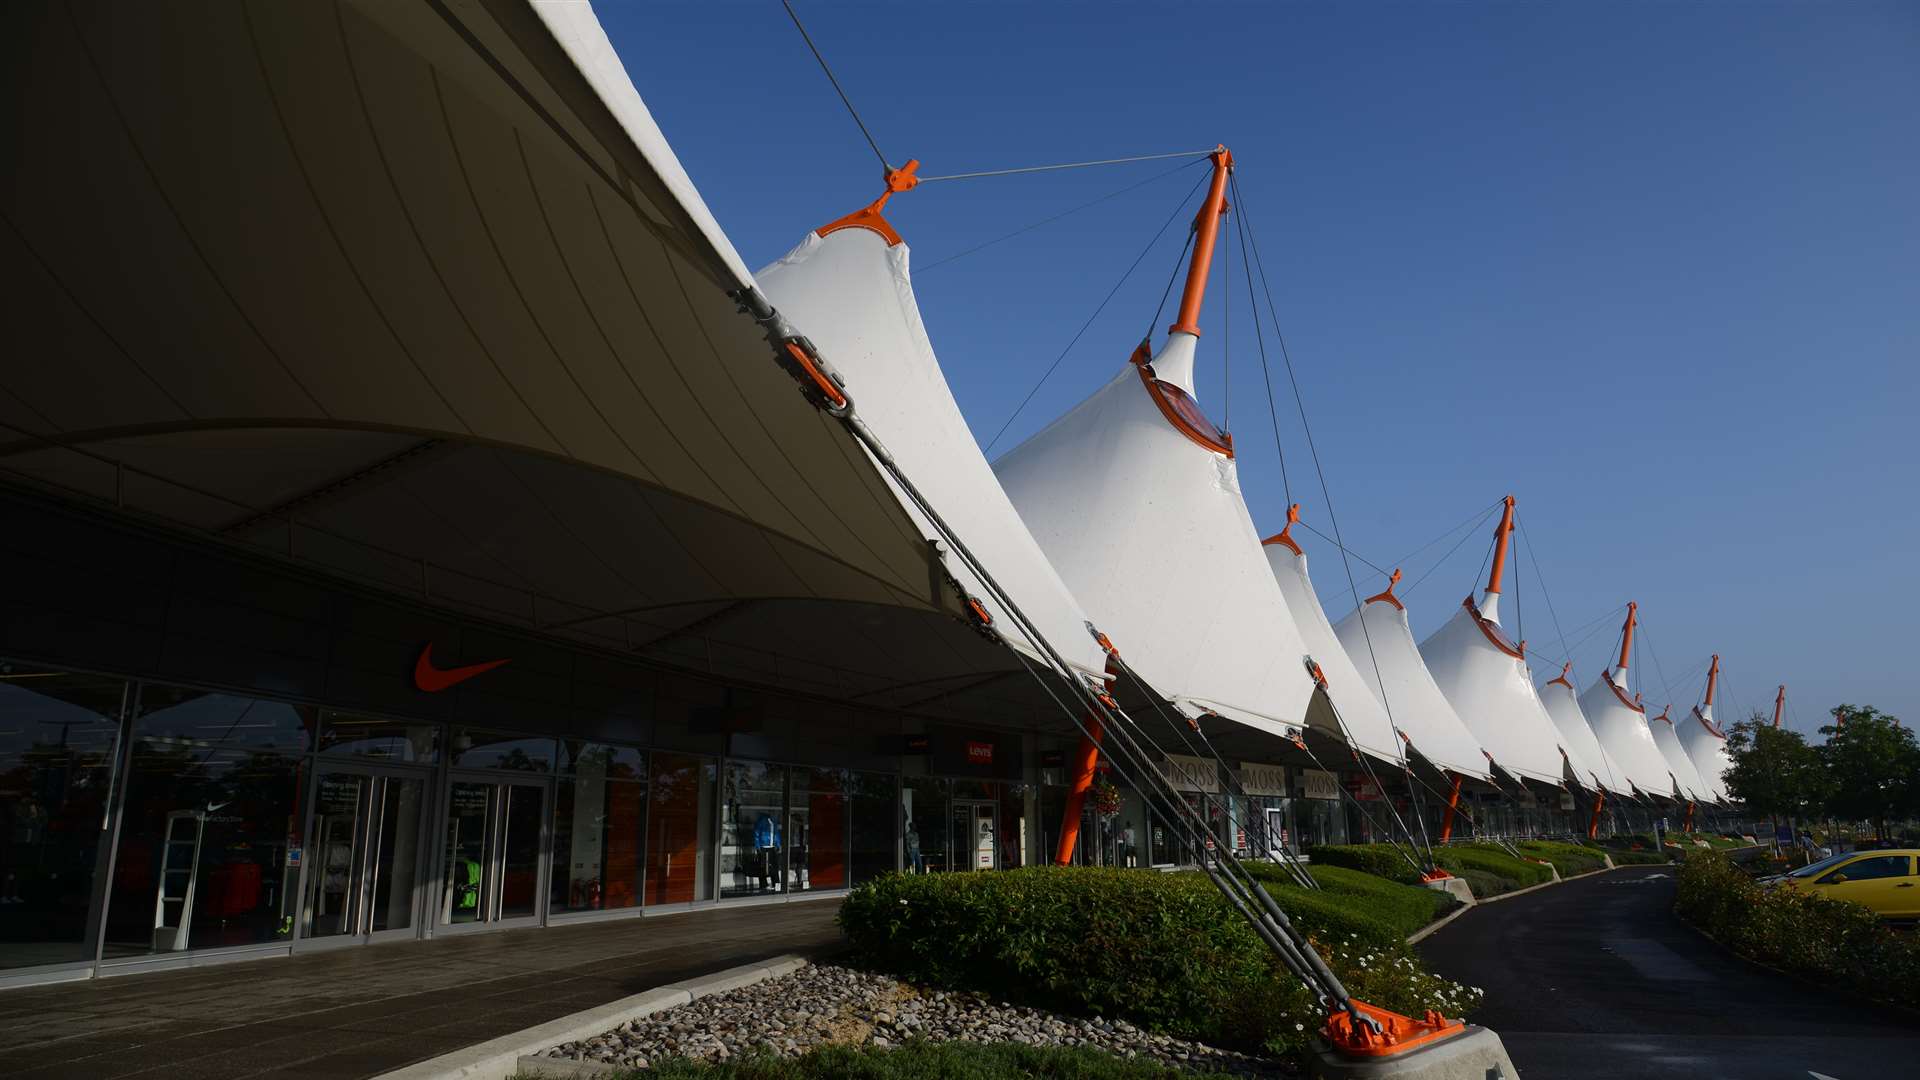 The Ashford Designer Outlet will be extended